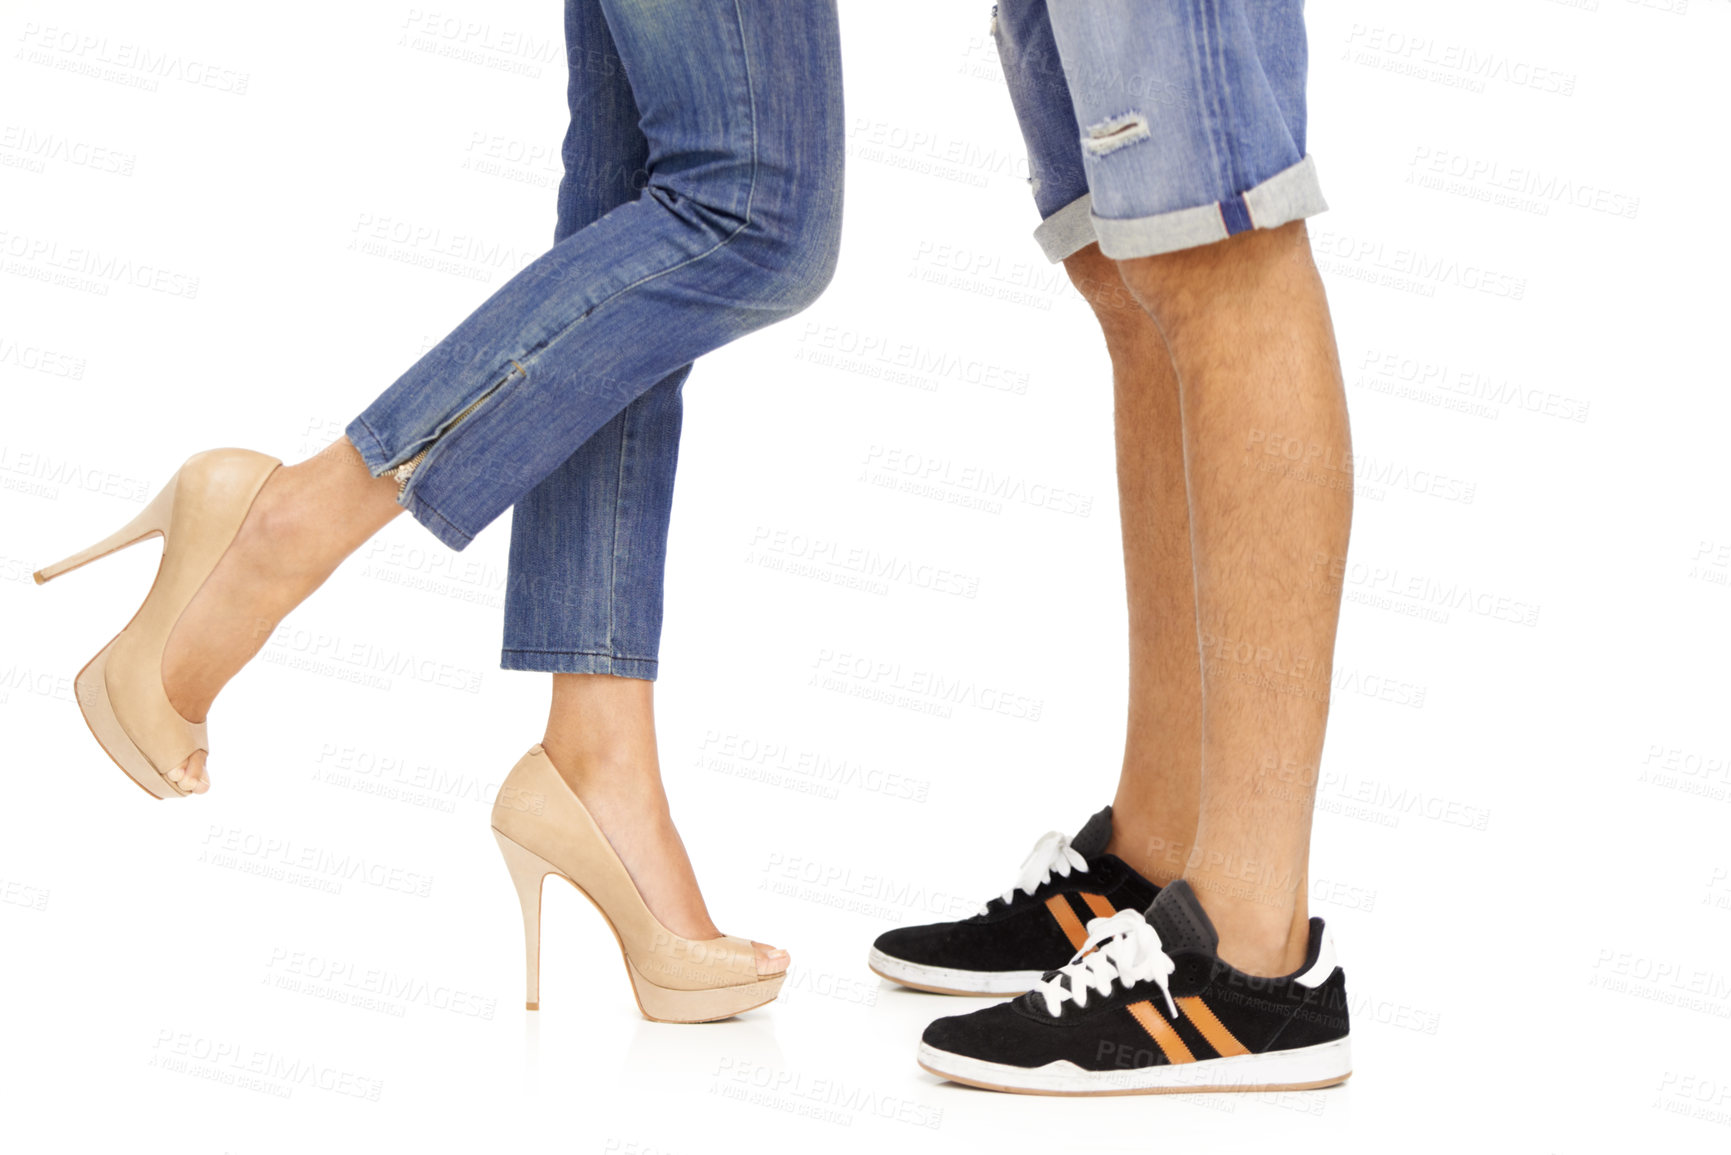 Buy stock photo Cropped image of a man and woman's feet as they stand together in a romantic pose